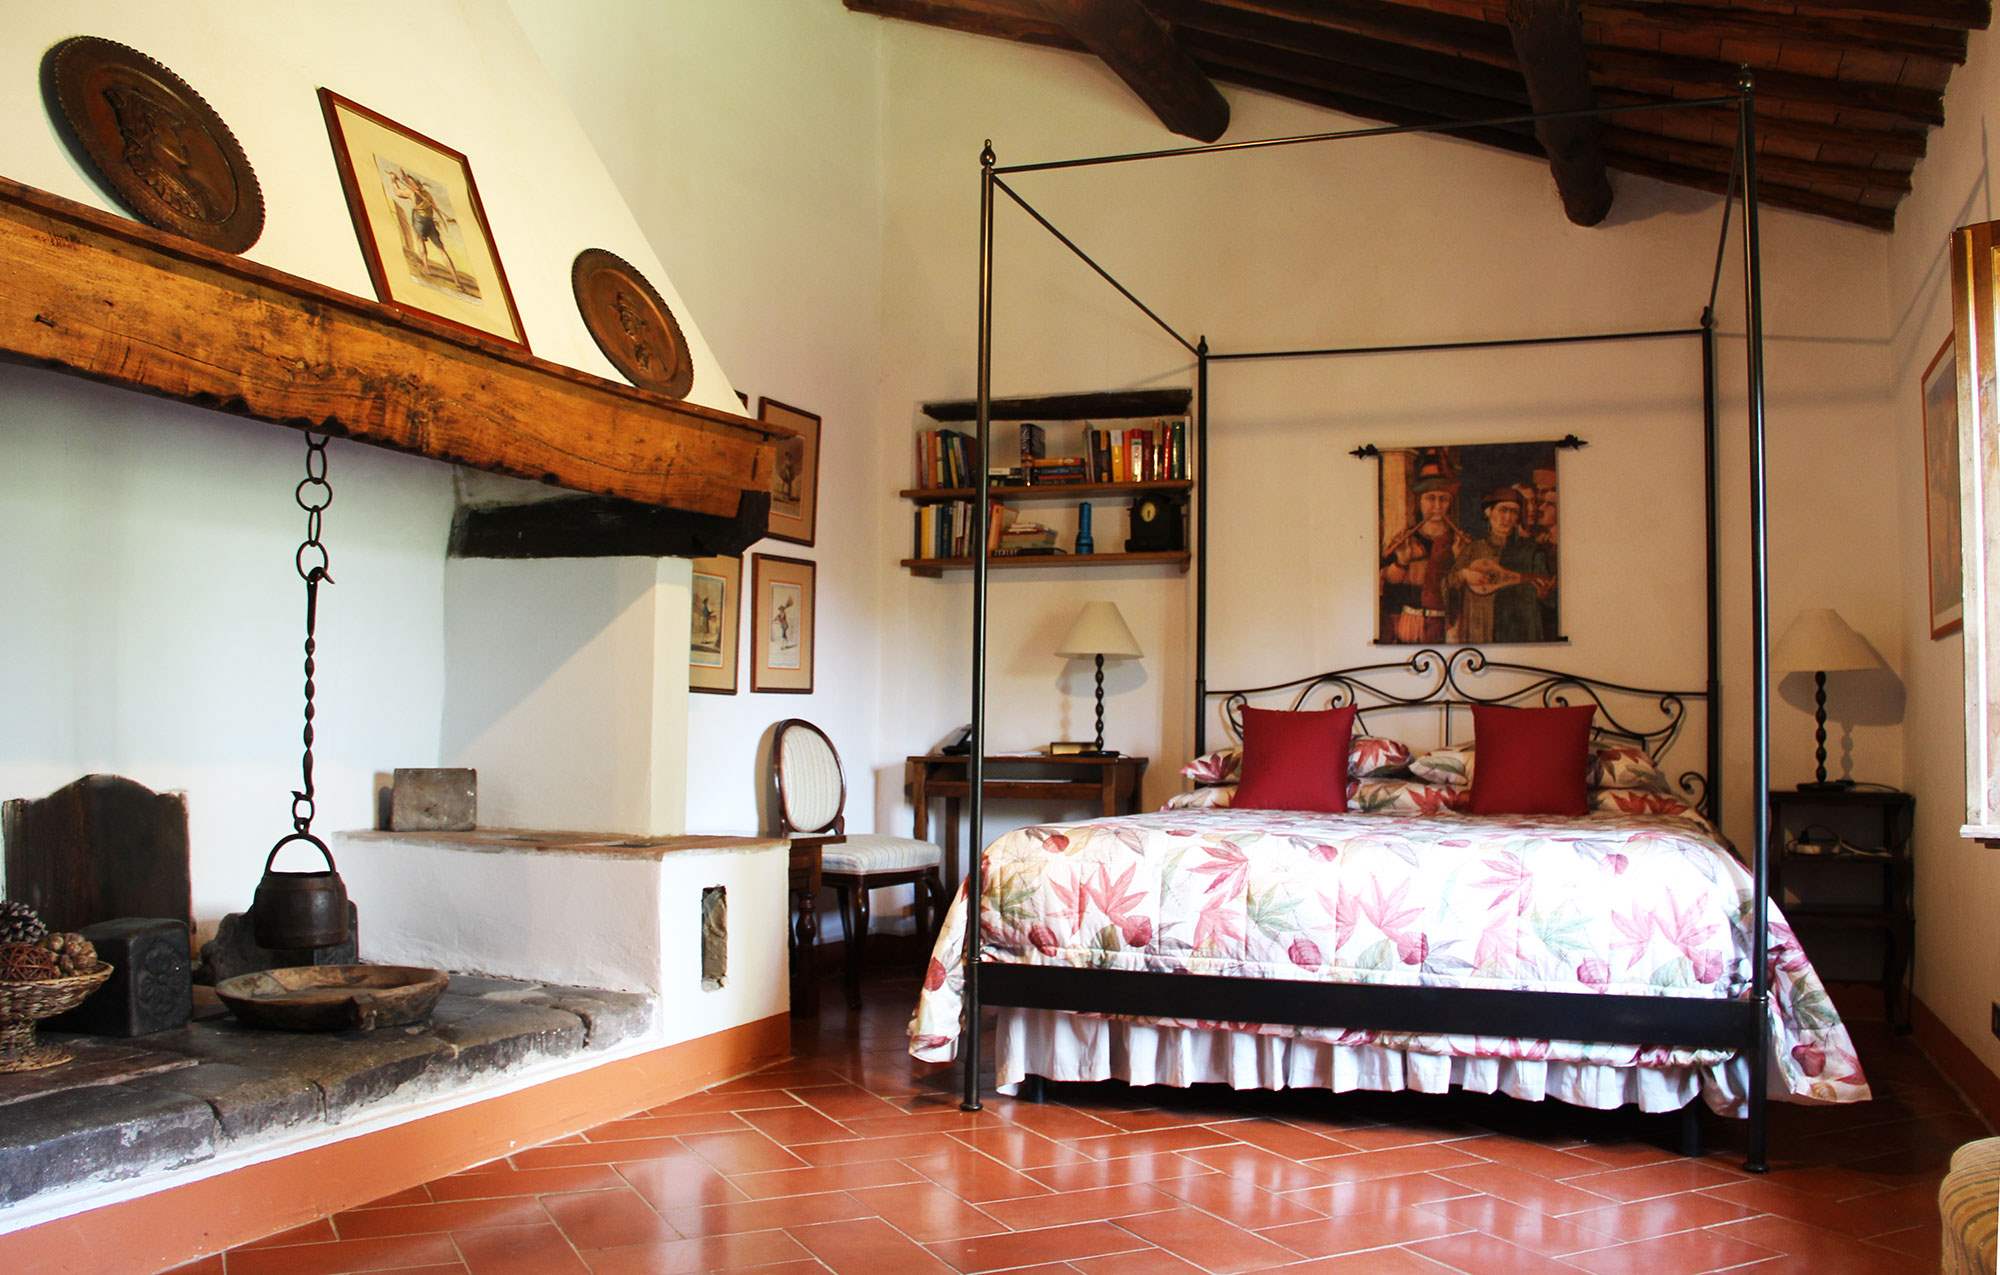 Villa Felicita, Main house only, up to 6 persons , 3 bedroom villa in Chianti & Countryside, Tuscany Photo #13